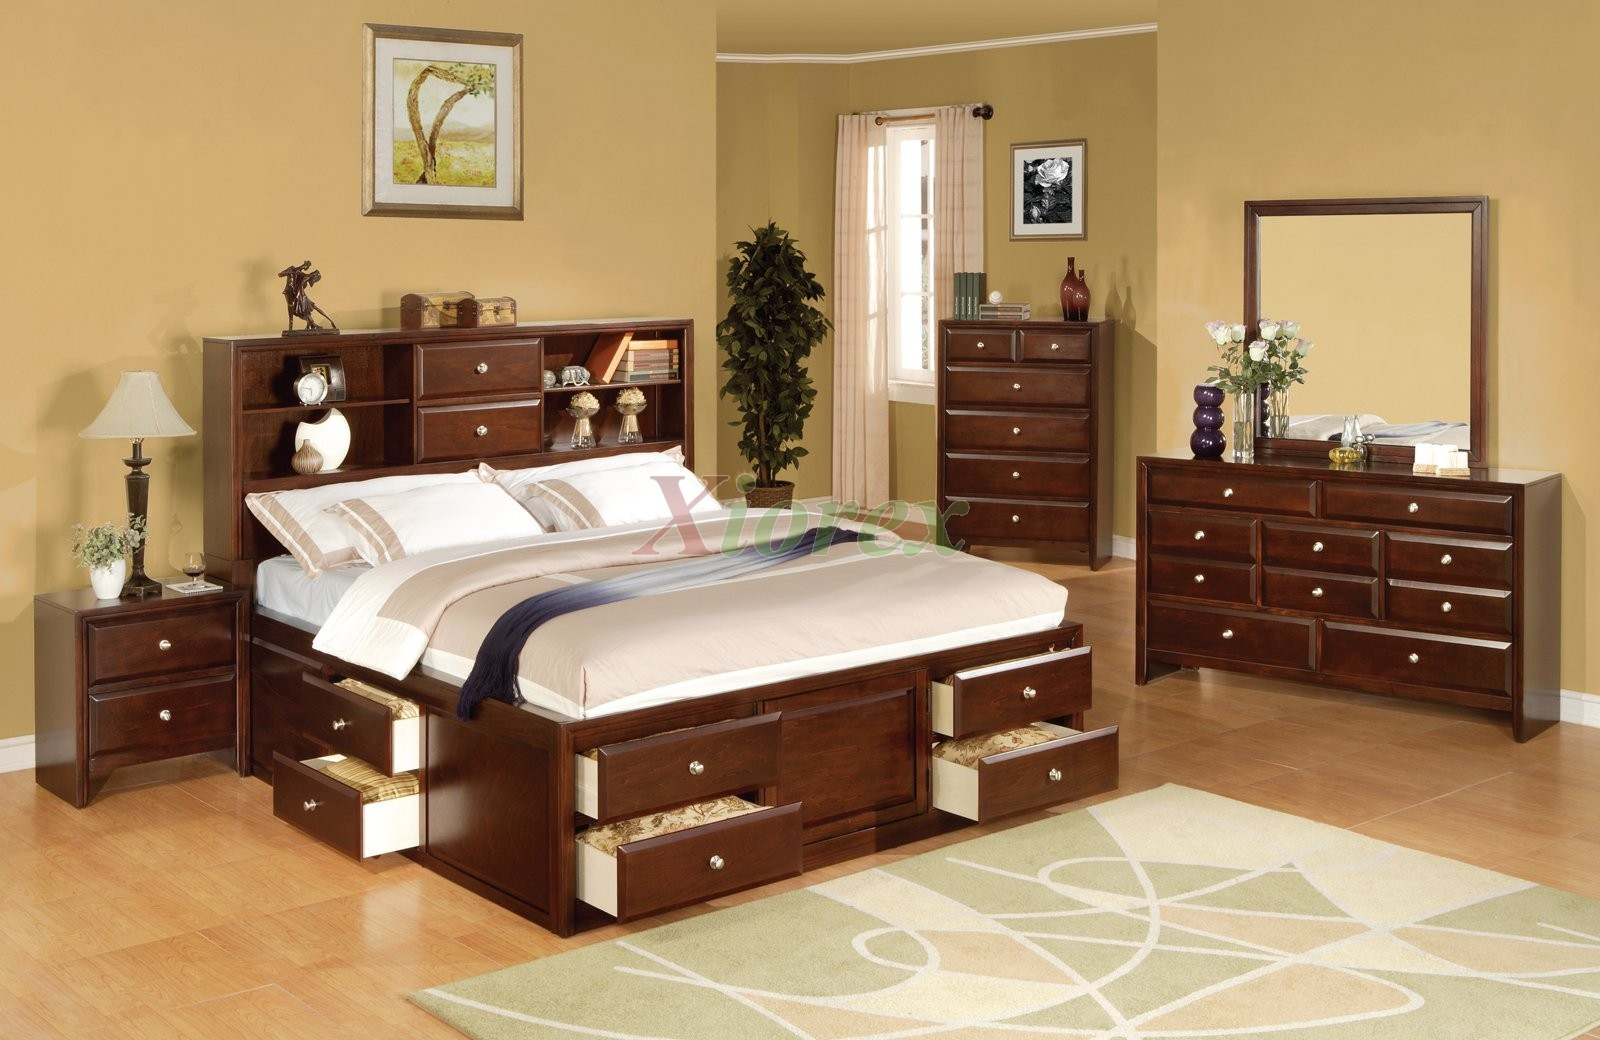 Bedroom Set With Storage
 A Lot of Bedroom Storage Ideas for the Better yet Well